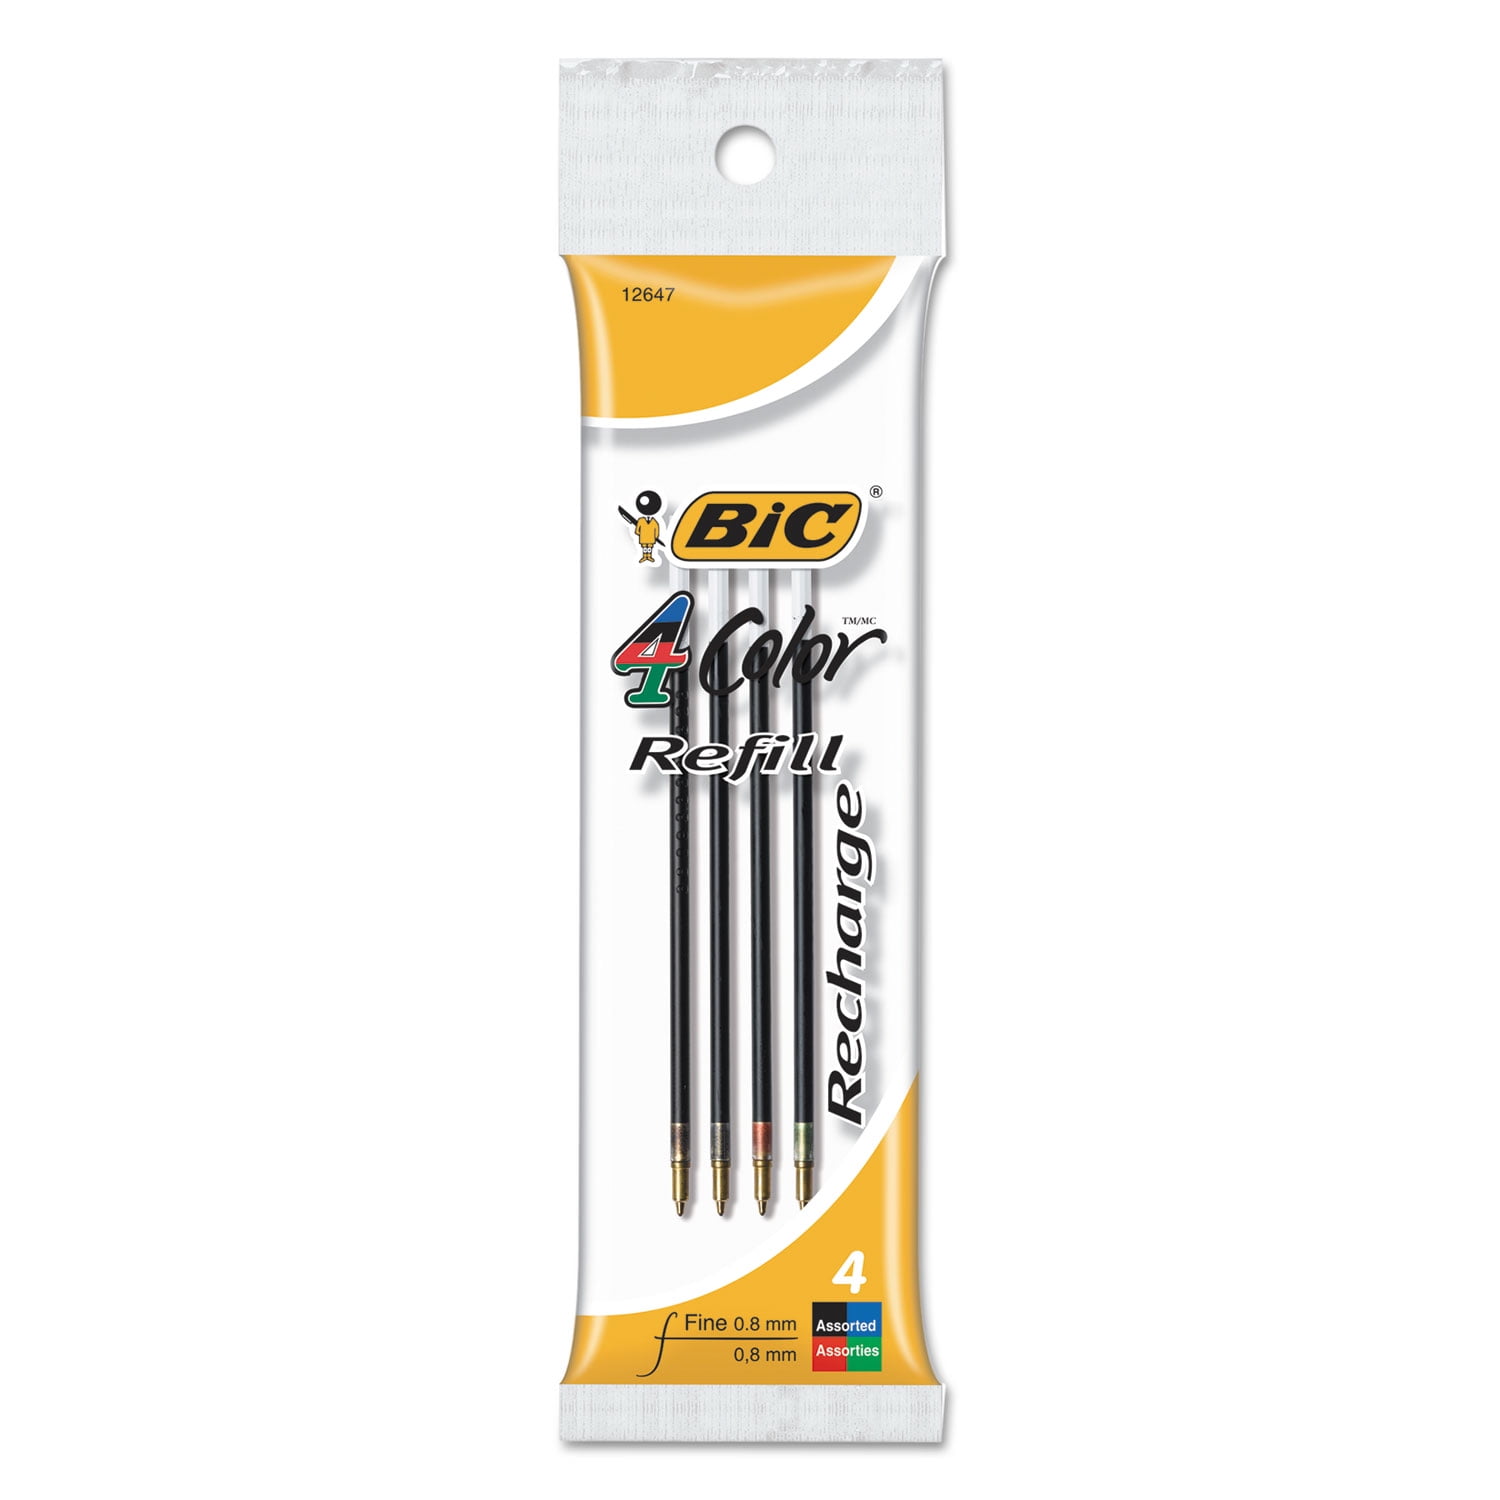 Assorted 4 Refills Bic Ballpoint Pen Refills for 4-Color Fine Point 0.8 mm 